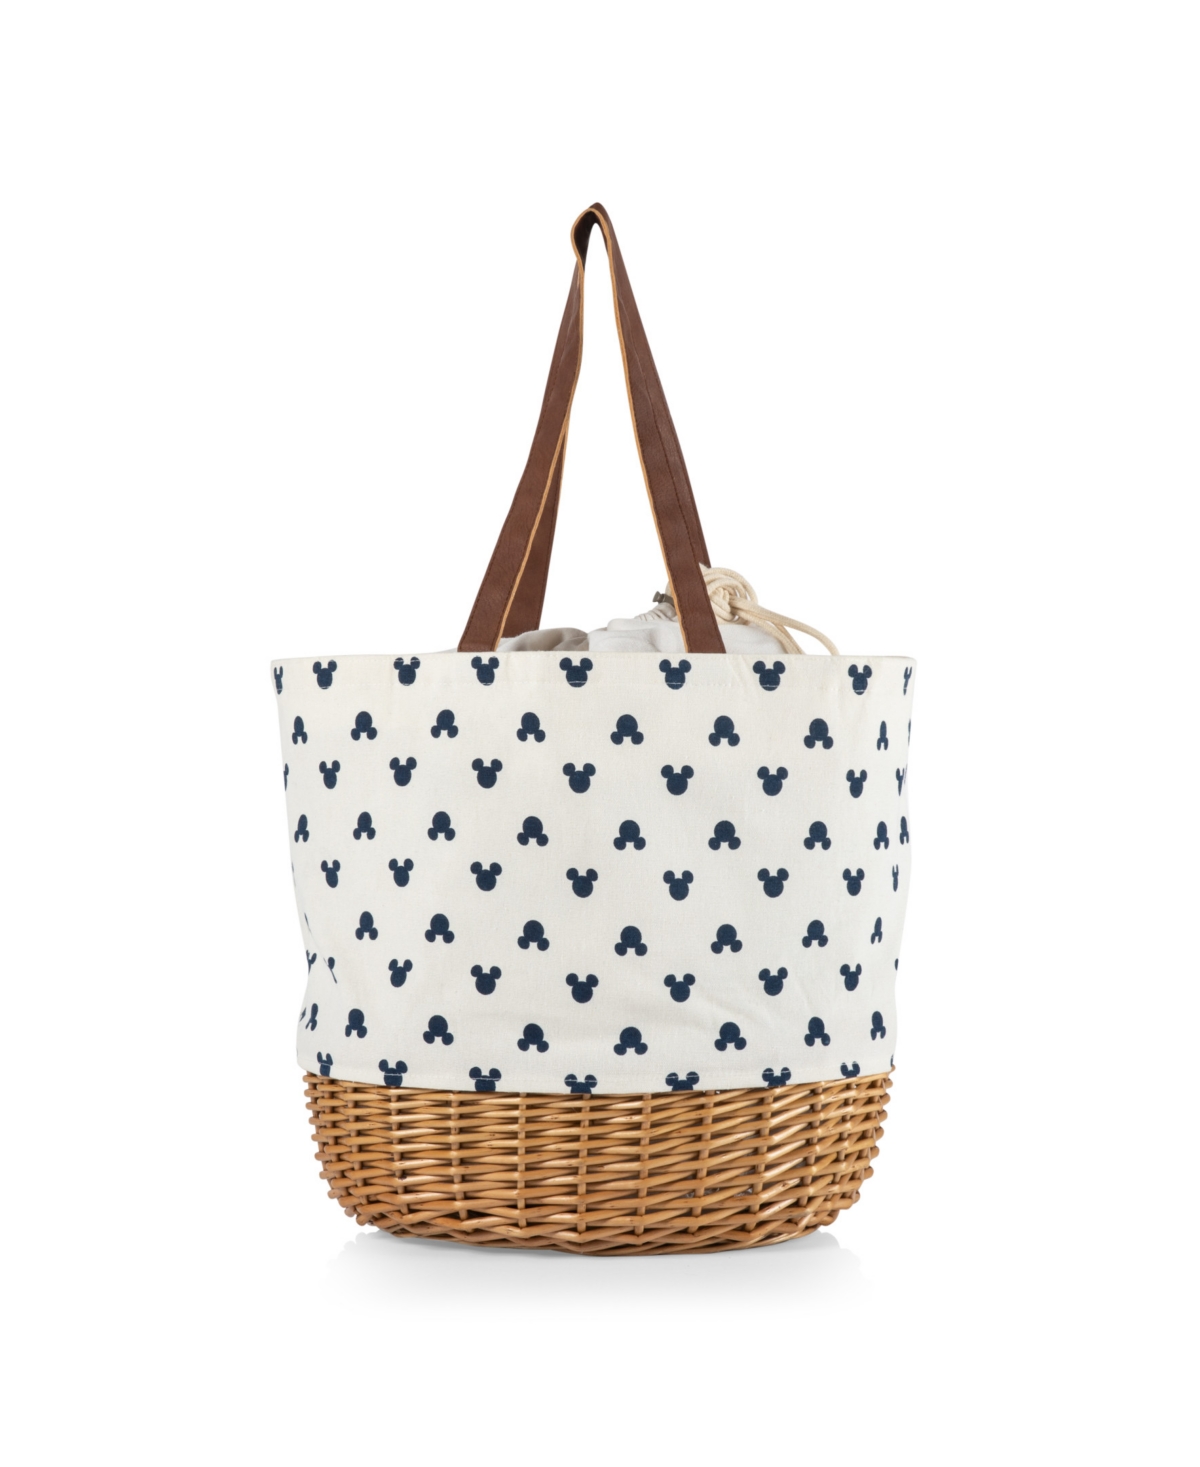 Disney Mickey Mouse Silhouette Coronado Canvas And Willow Basket Tote In Cream With Navy Blue Pattern